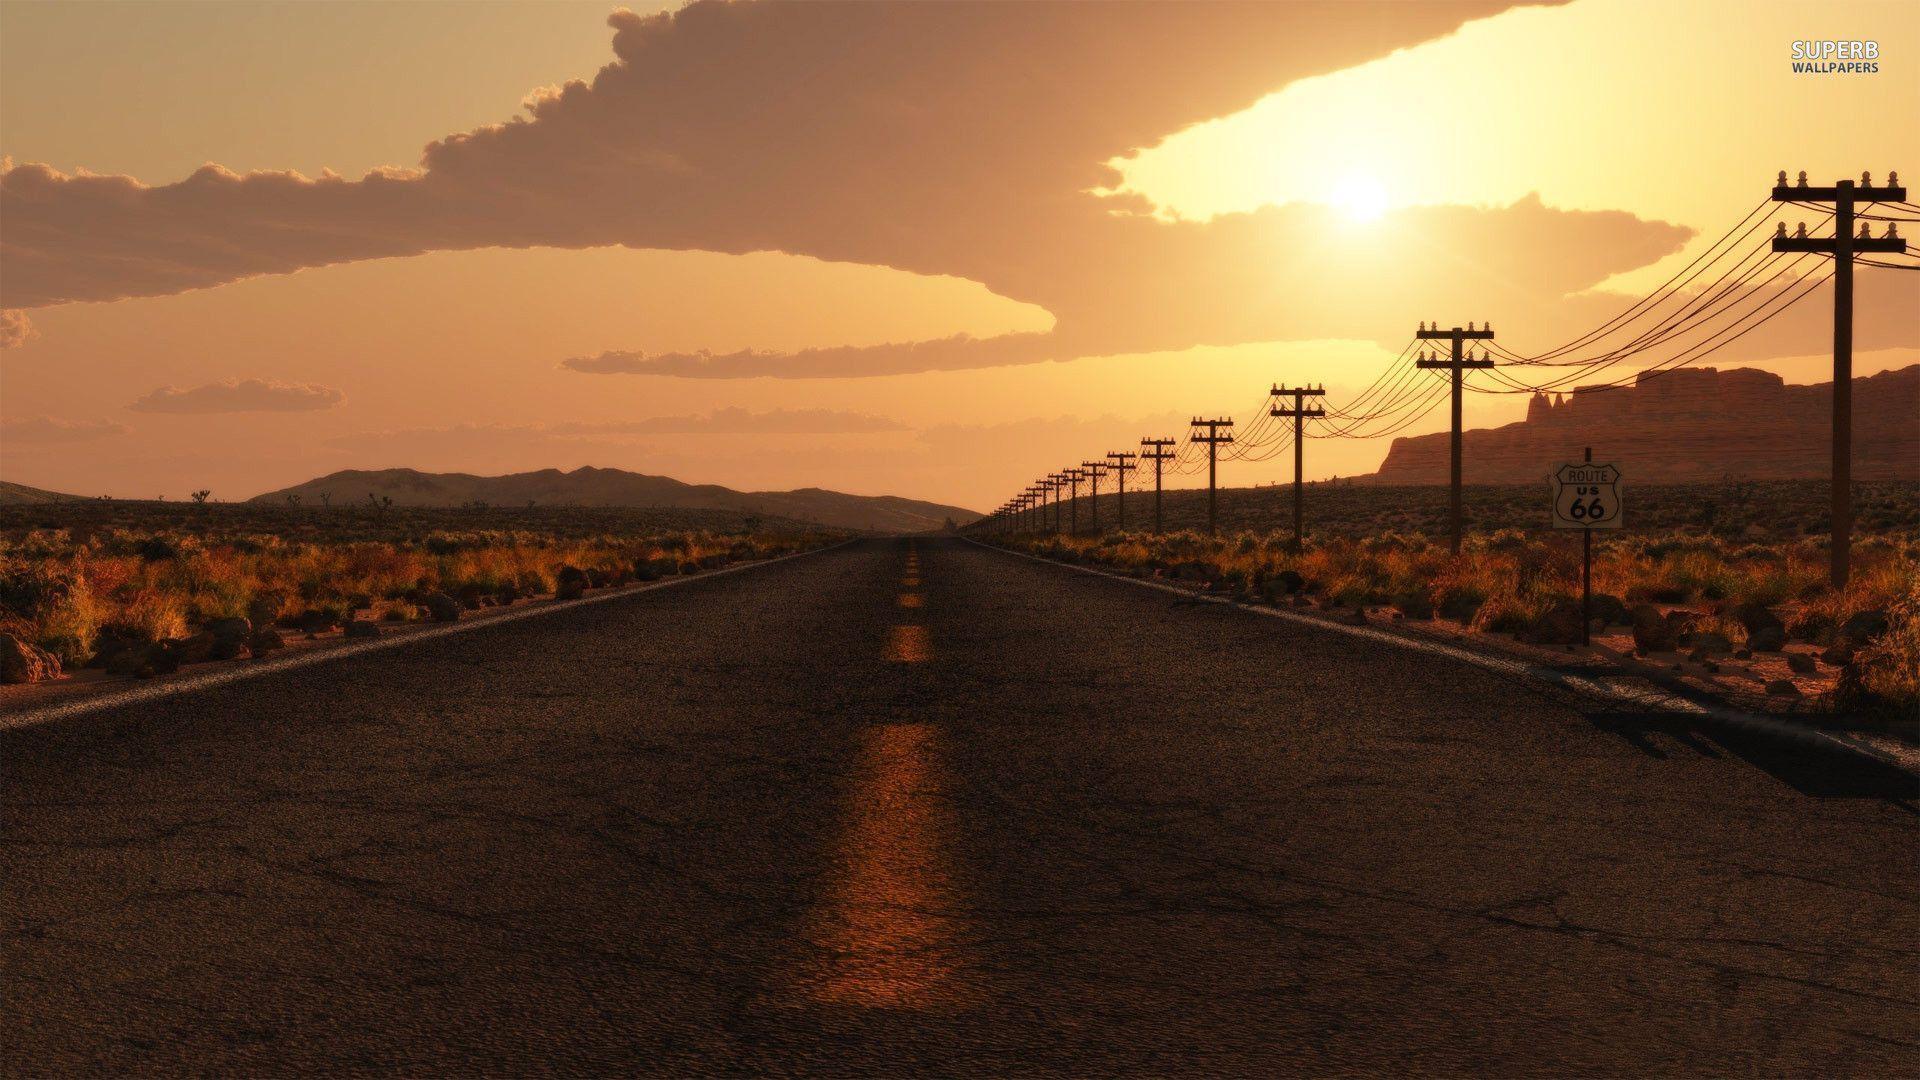 Route 66 Wallpaper - Route 66 Wallpaper Hd , HD Wallpaper & Backgrounds